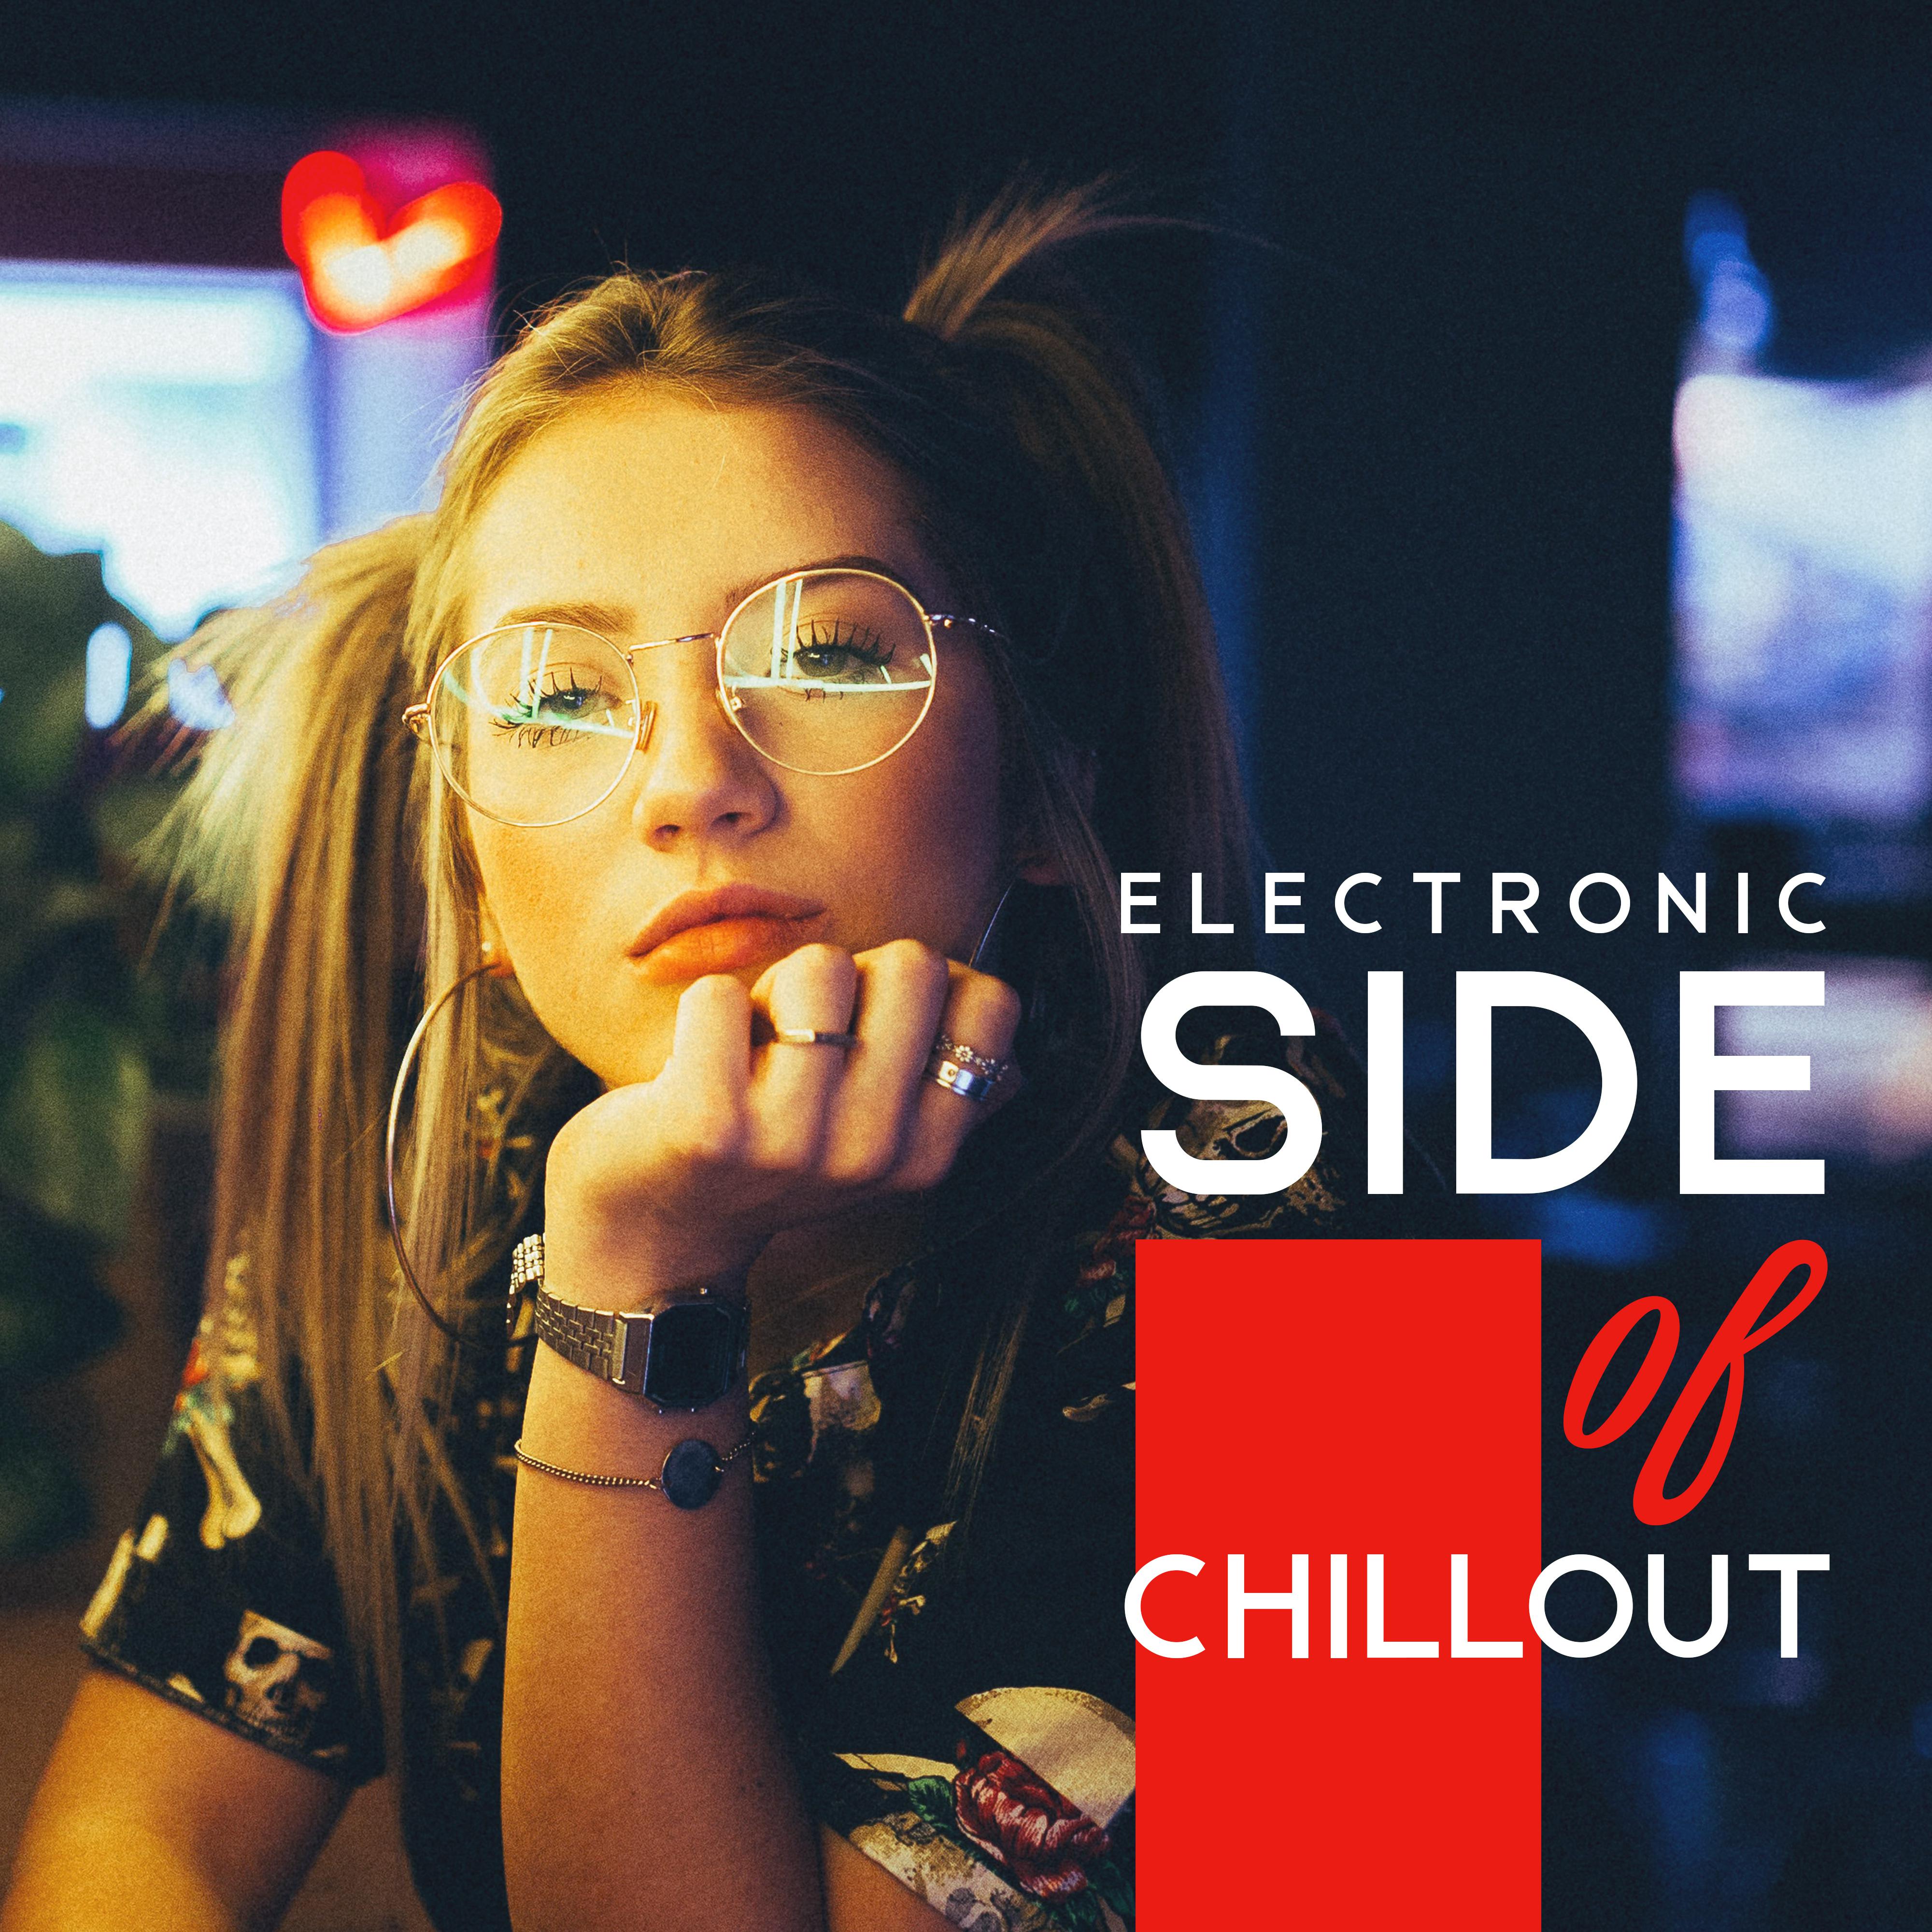 Electronic Side of Chillout